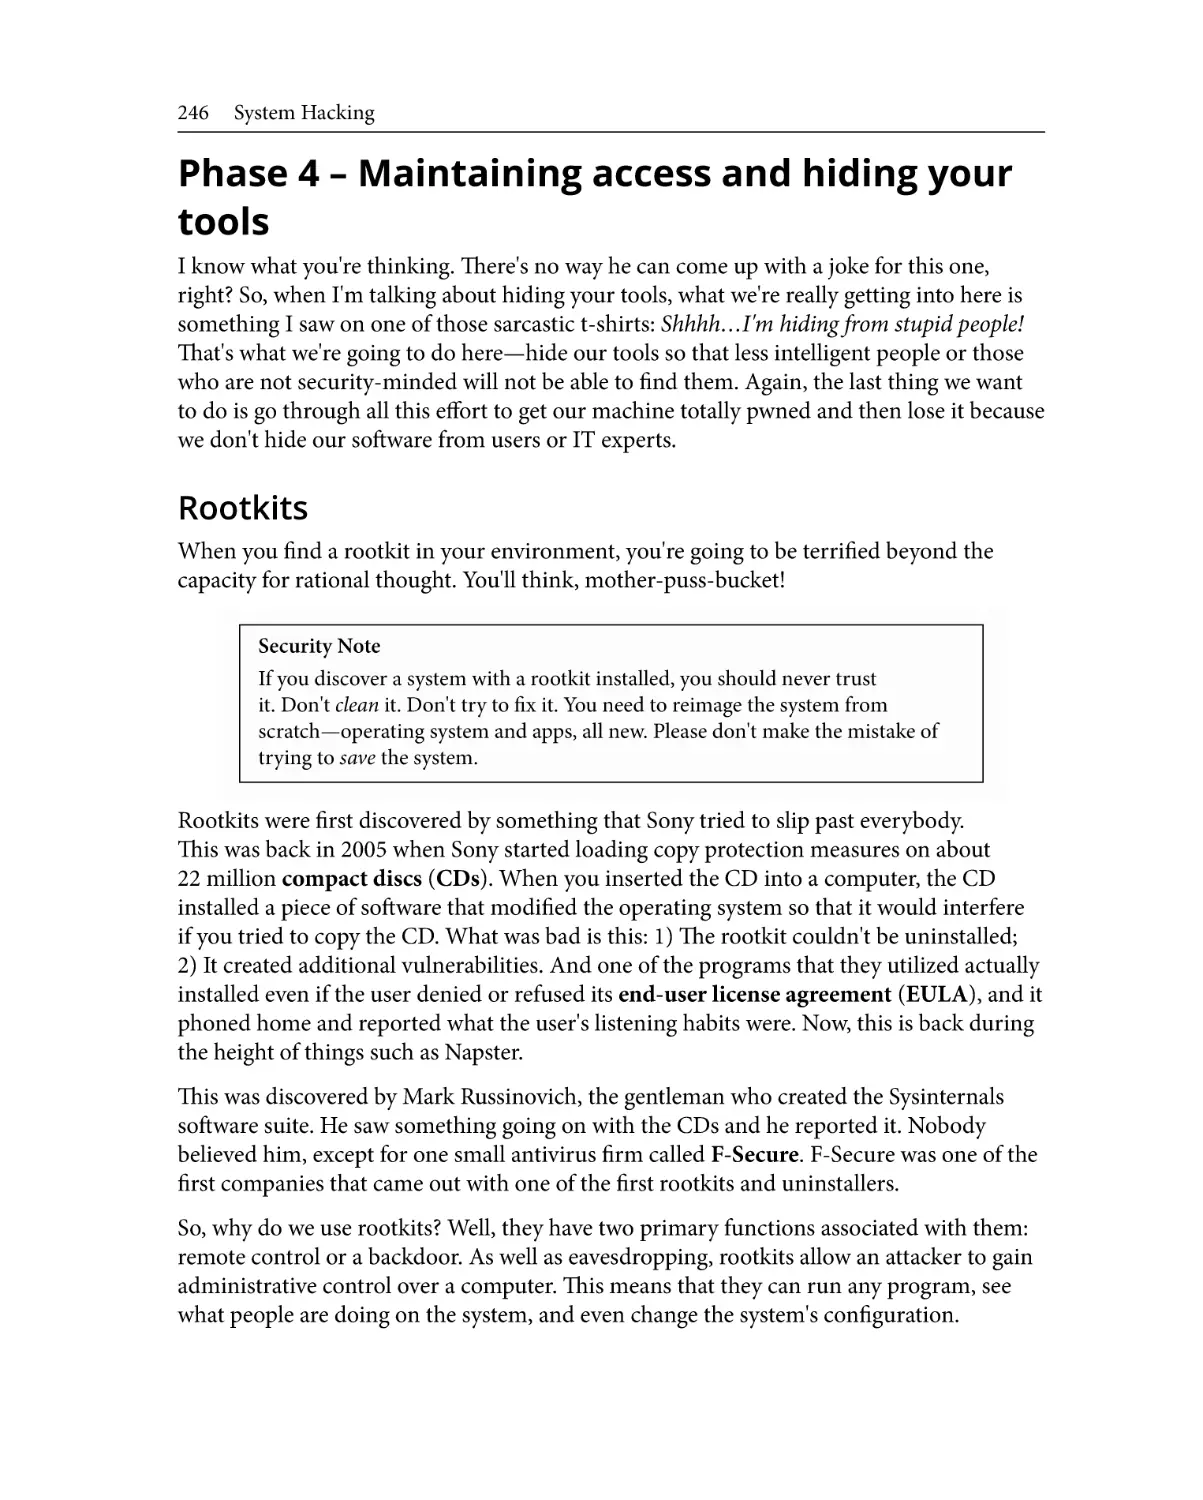 Phase 4 – Maintaining access and hiding your tools
Rootkits